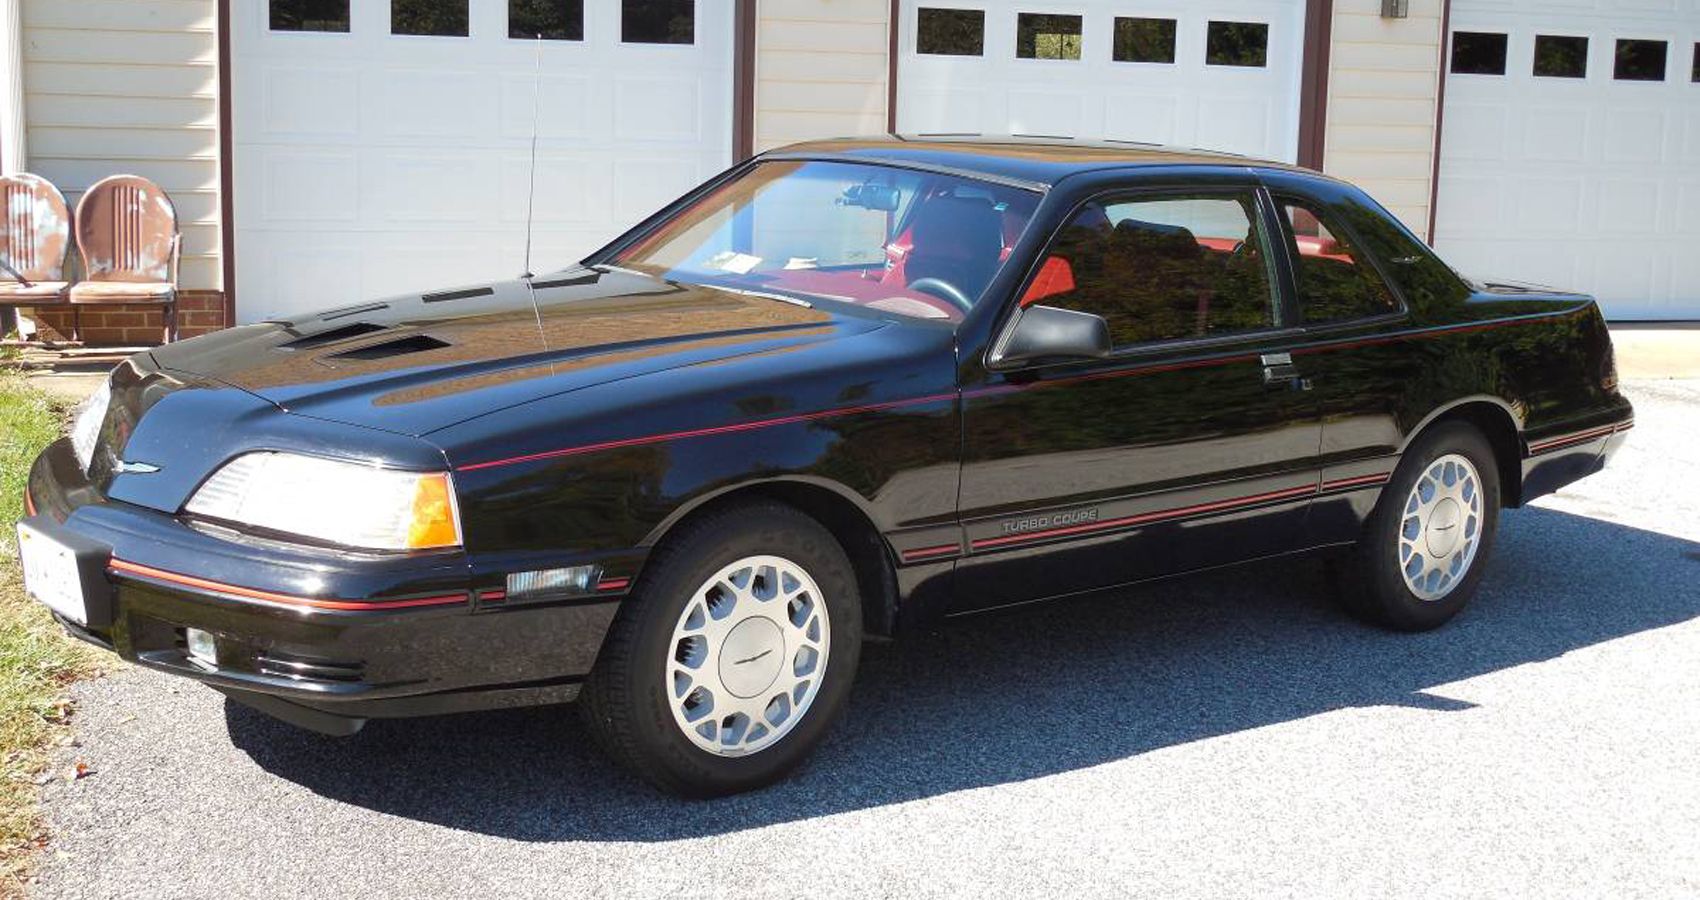 1988 Ford Thunderbird Turbo Coupe, black, front quarter view, infront of garage